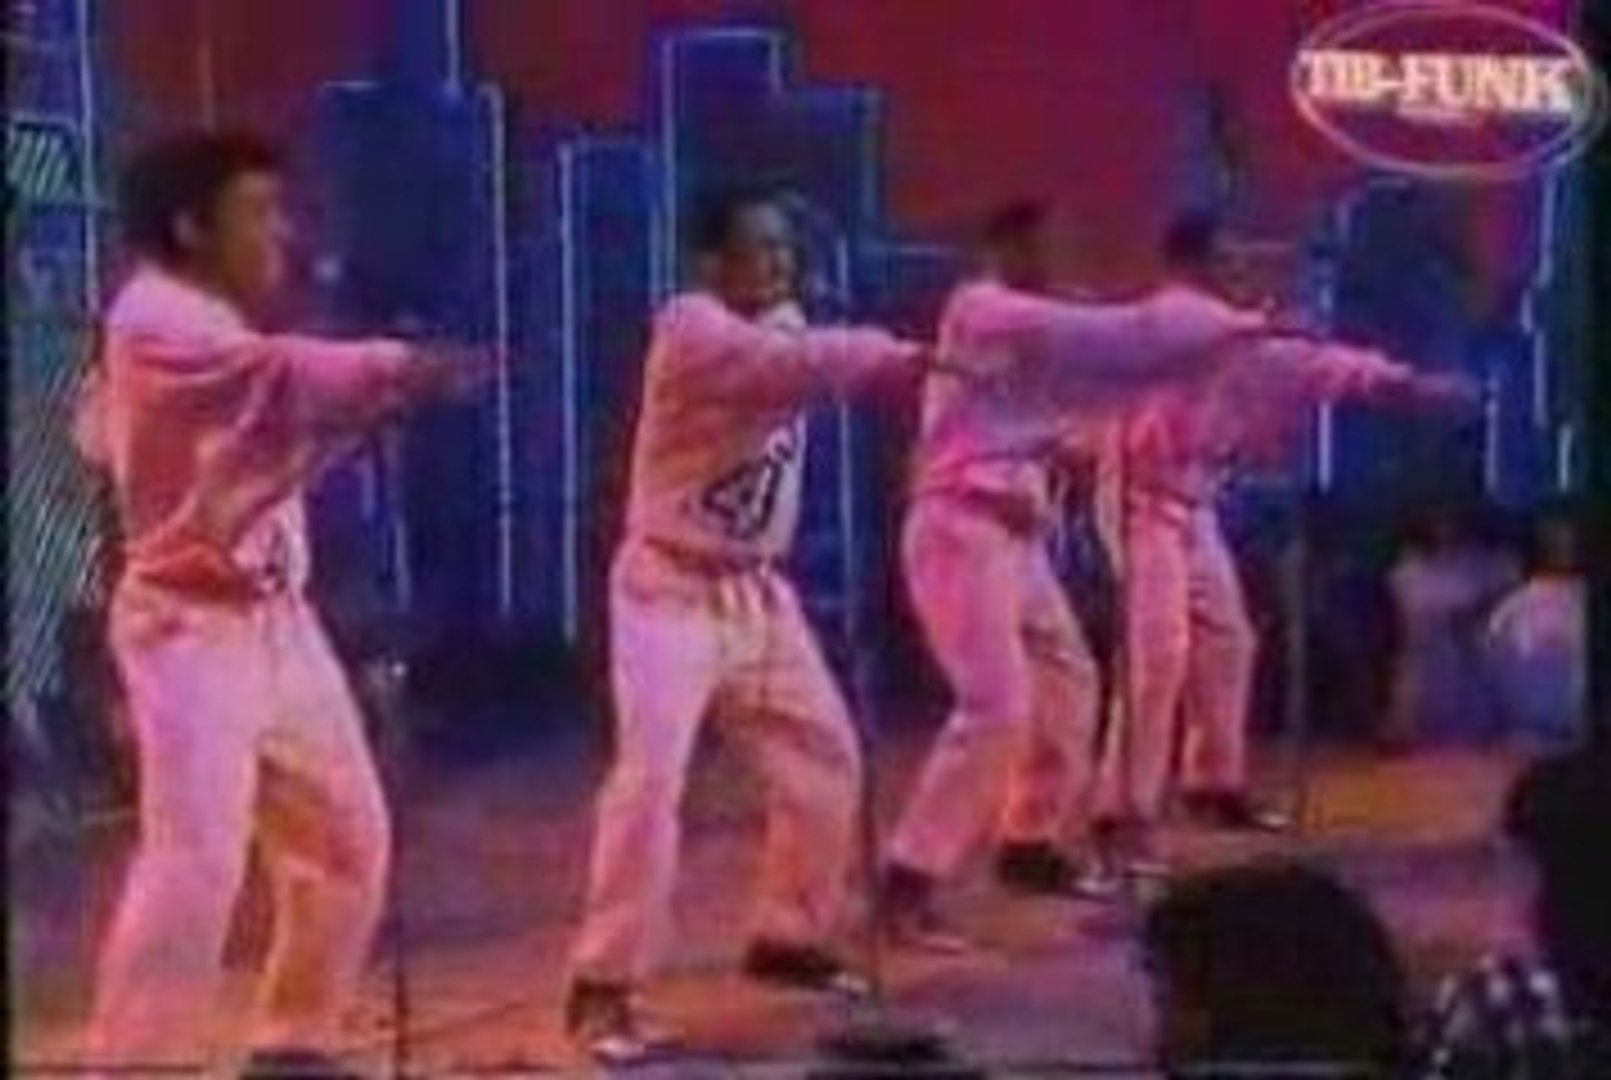 4 By Four - Want you for my girlfriend TIB-FUNK - Vidéo Dailymotion